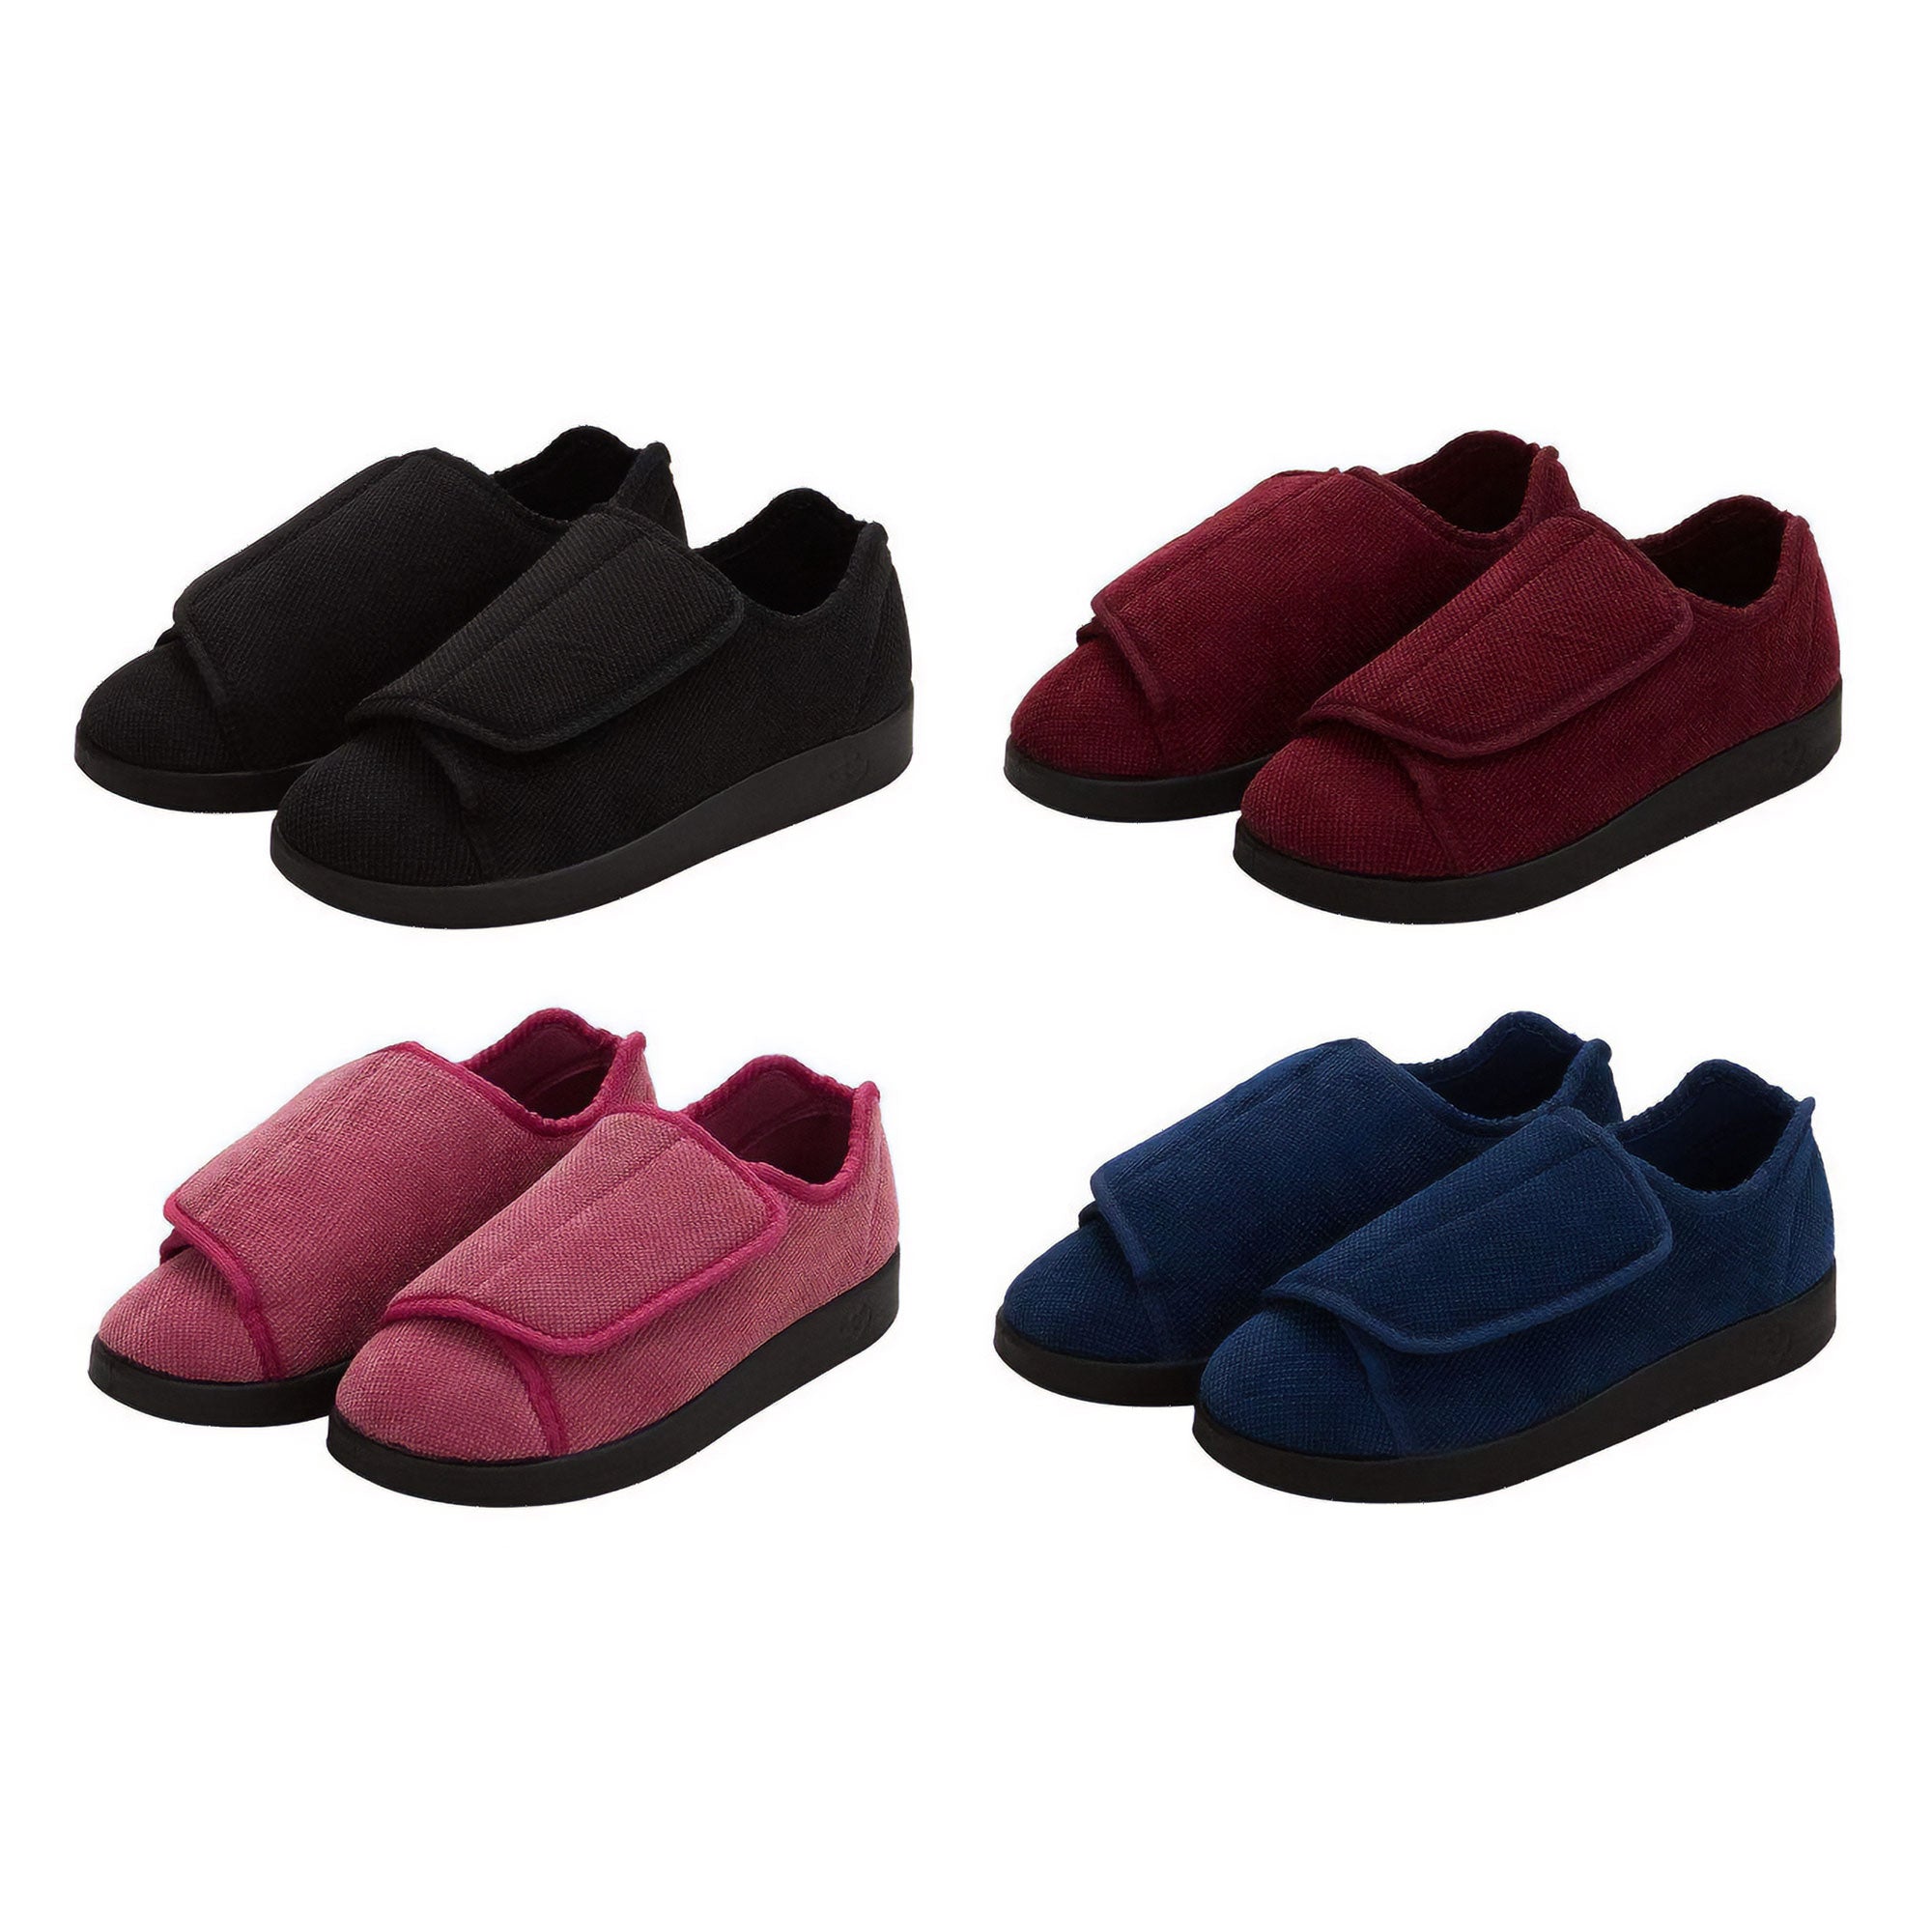 Silverts Women's Antimicrobial Extra Extra Wide Easy-Closure Slippers - Wine - 9